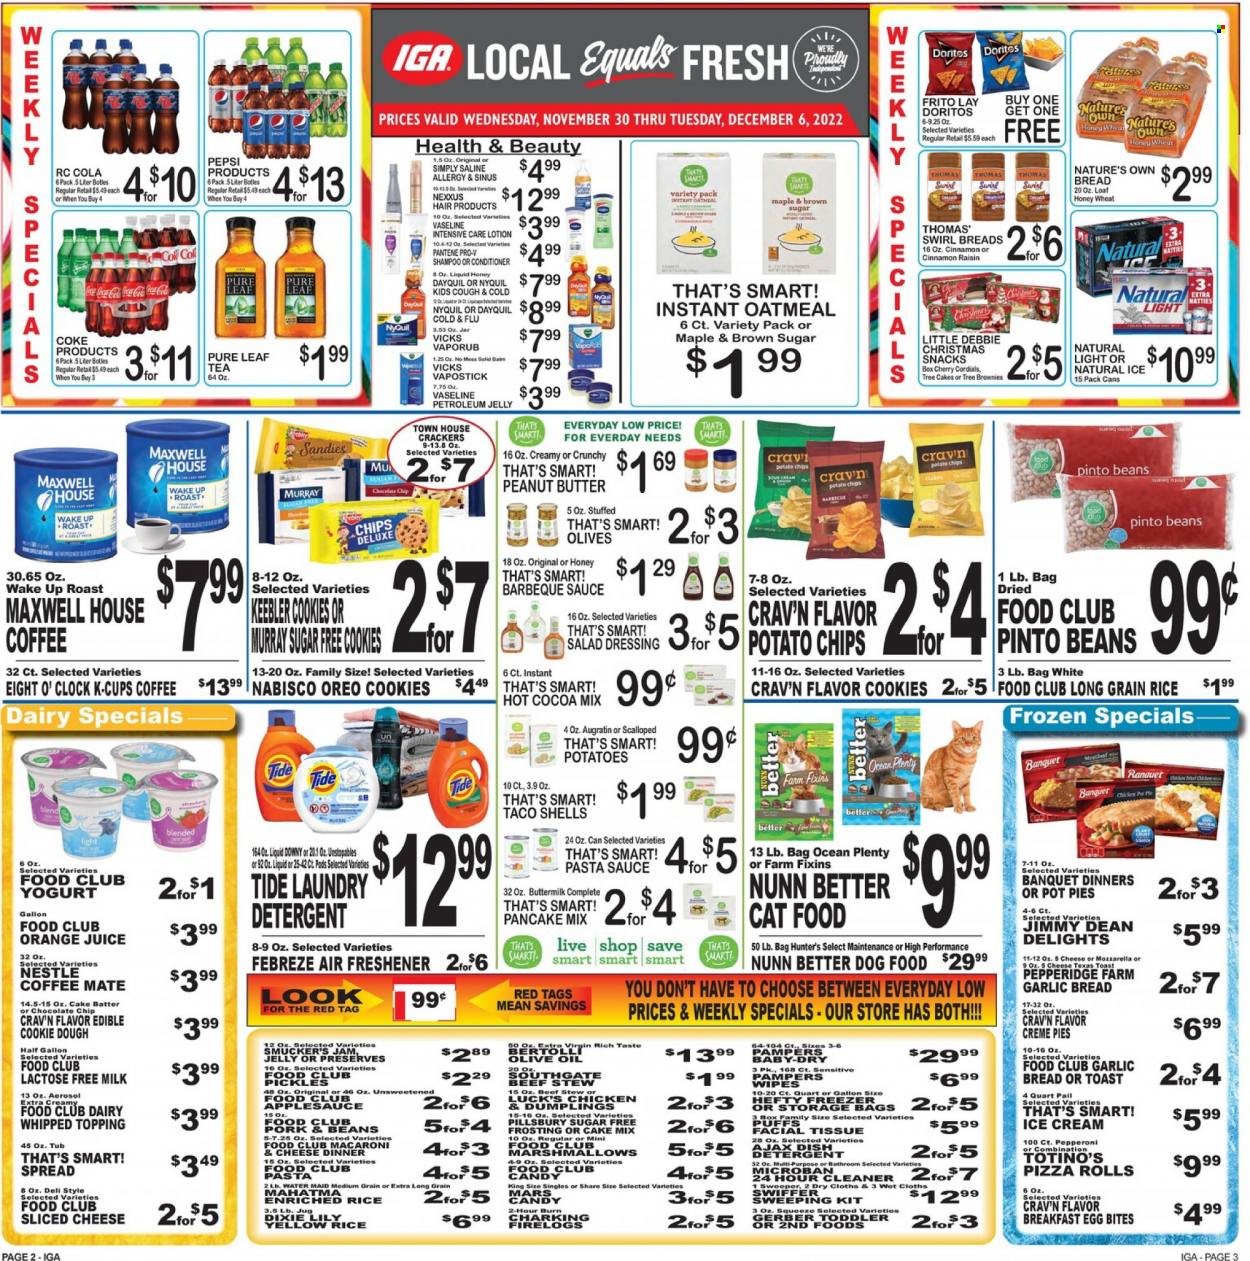 thumbnail - IGA Flyer - 11/30/2022 - 12/06/2022 - Sales products - bread, pizza rolls, pot pie, puffs, brownies, cake mix, cherries, macaroni & cheese, pizza, pasta sauce, sauce, pancakes, Pillsbury, dumplings, Bertolli, Jimmy Dean, sliced cheese, Oreo, yoghurt, buttermilk, Coffee-Mate, lactose free milk, eggs, ice cream, cookies, Nestlé, snack, crackers, Keebler, Doritos, Gerber, potato chips, frosting, oatmeal, topping, pickles, pinto beans, olives, rice, long grain rice, BBQ sauce, olive oil, oil, apple sauce, fruit jam, peanut butter, Coca-Cola, Pepsi, orange juice, juice, hot cocoa, Maxwell House, tea, Pure Leaf, coffee capsules, K-Cups, Eight O'Clock, wipes, Pampers, petroleum jelly, tissues, Plenty, detergent, Febreze, cleaner, Ajax, Tide, Unstopables, laundry detergent, dishwasher cleaner, shampoo, Vaseline, conditioner, Pantene, body lotion, Vicks, storage bag, air freshener, Dixie, animal food, cat food, dog food, DayQuil, Cold & Flu, NyQuil, Nature's Own, VapoRub, Simply Saline. Page 2.